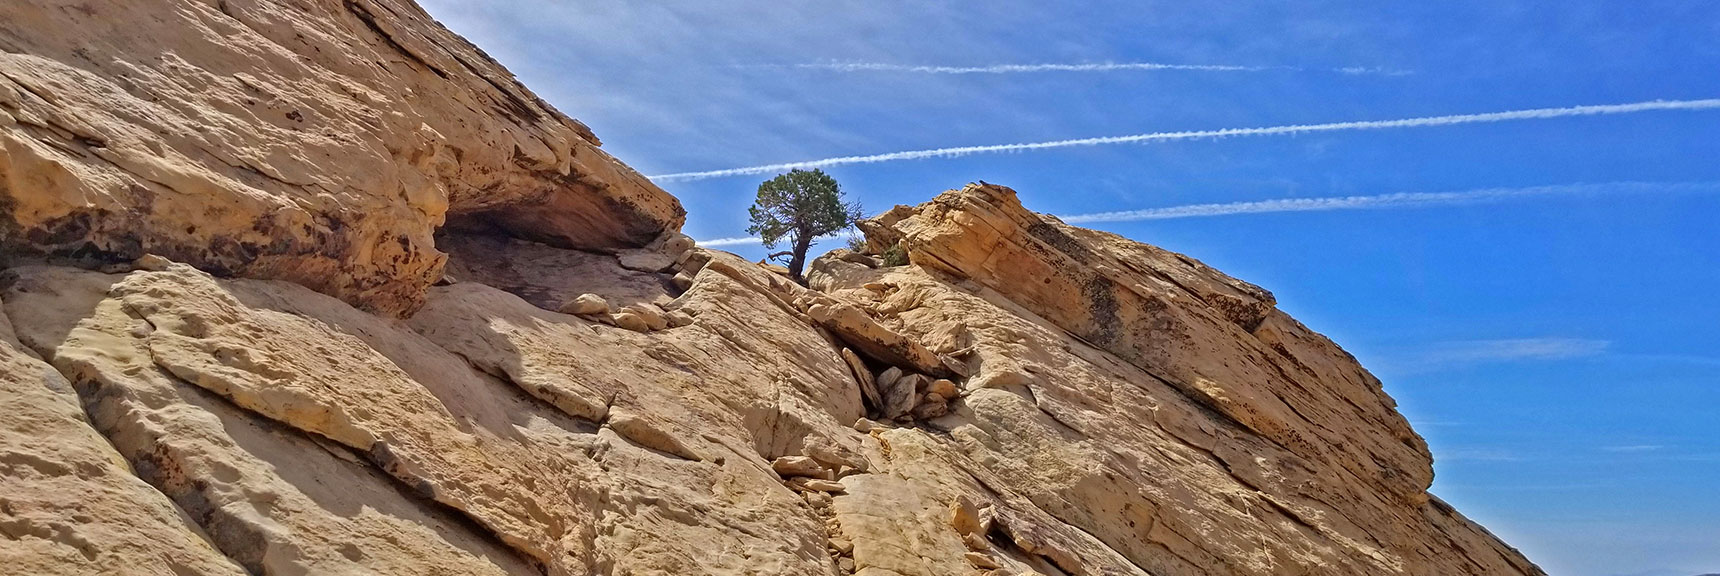 Continuing to Ascend Summit Crack. Artistic Bonsai-Like Pines Appear Amid Jurassic Rock Formations | Windy Peak | Rainbow Mountain Wilderness, Nevada